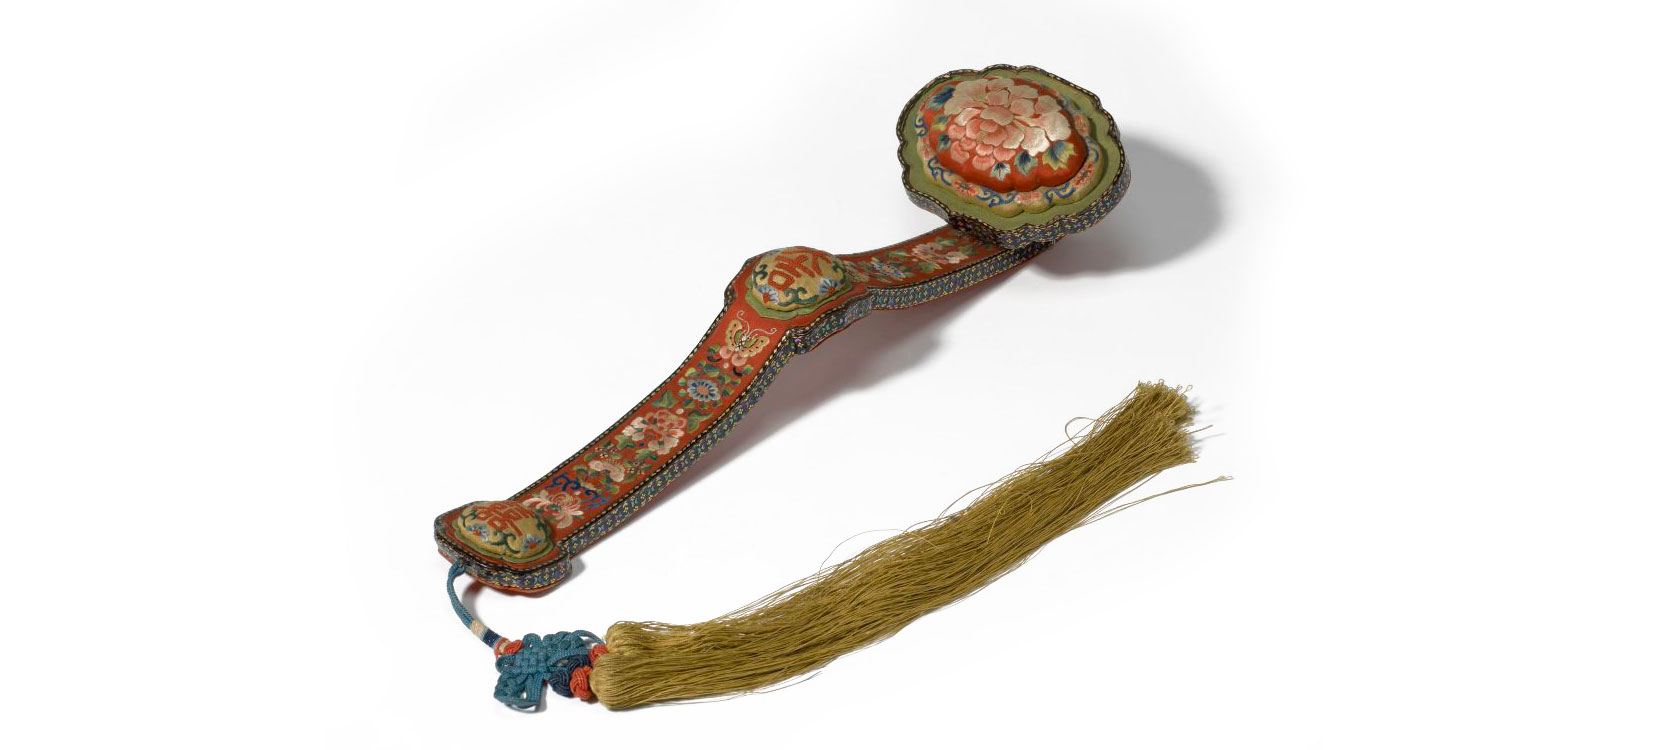 Scepter for Wedding, China, Qing Dynasty (1644-1911). Wood, embroidered silk, 15 inches (38.1 cm). The Nelson-Atkins Museum of Art, Kansas City, Missouri. Purchase: William Rockhill Nelson Trust, 34-64.